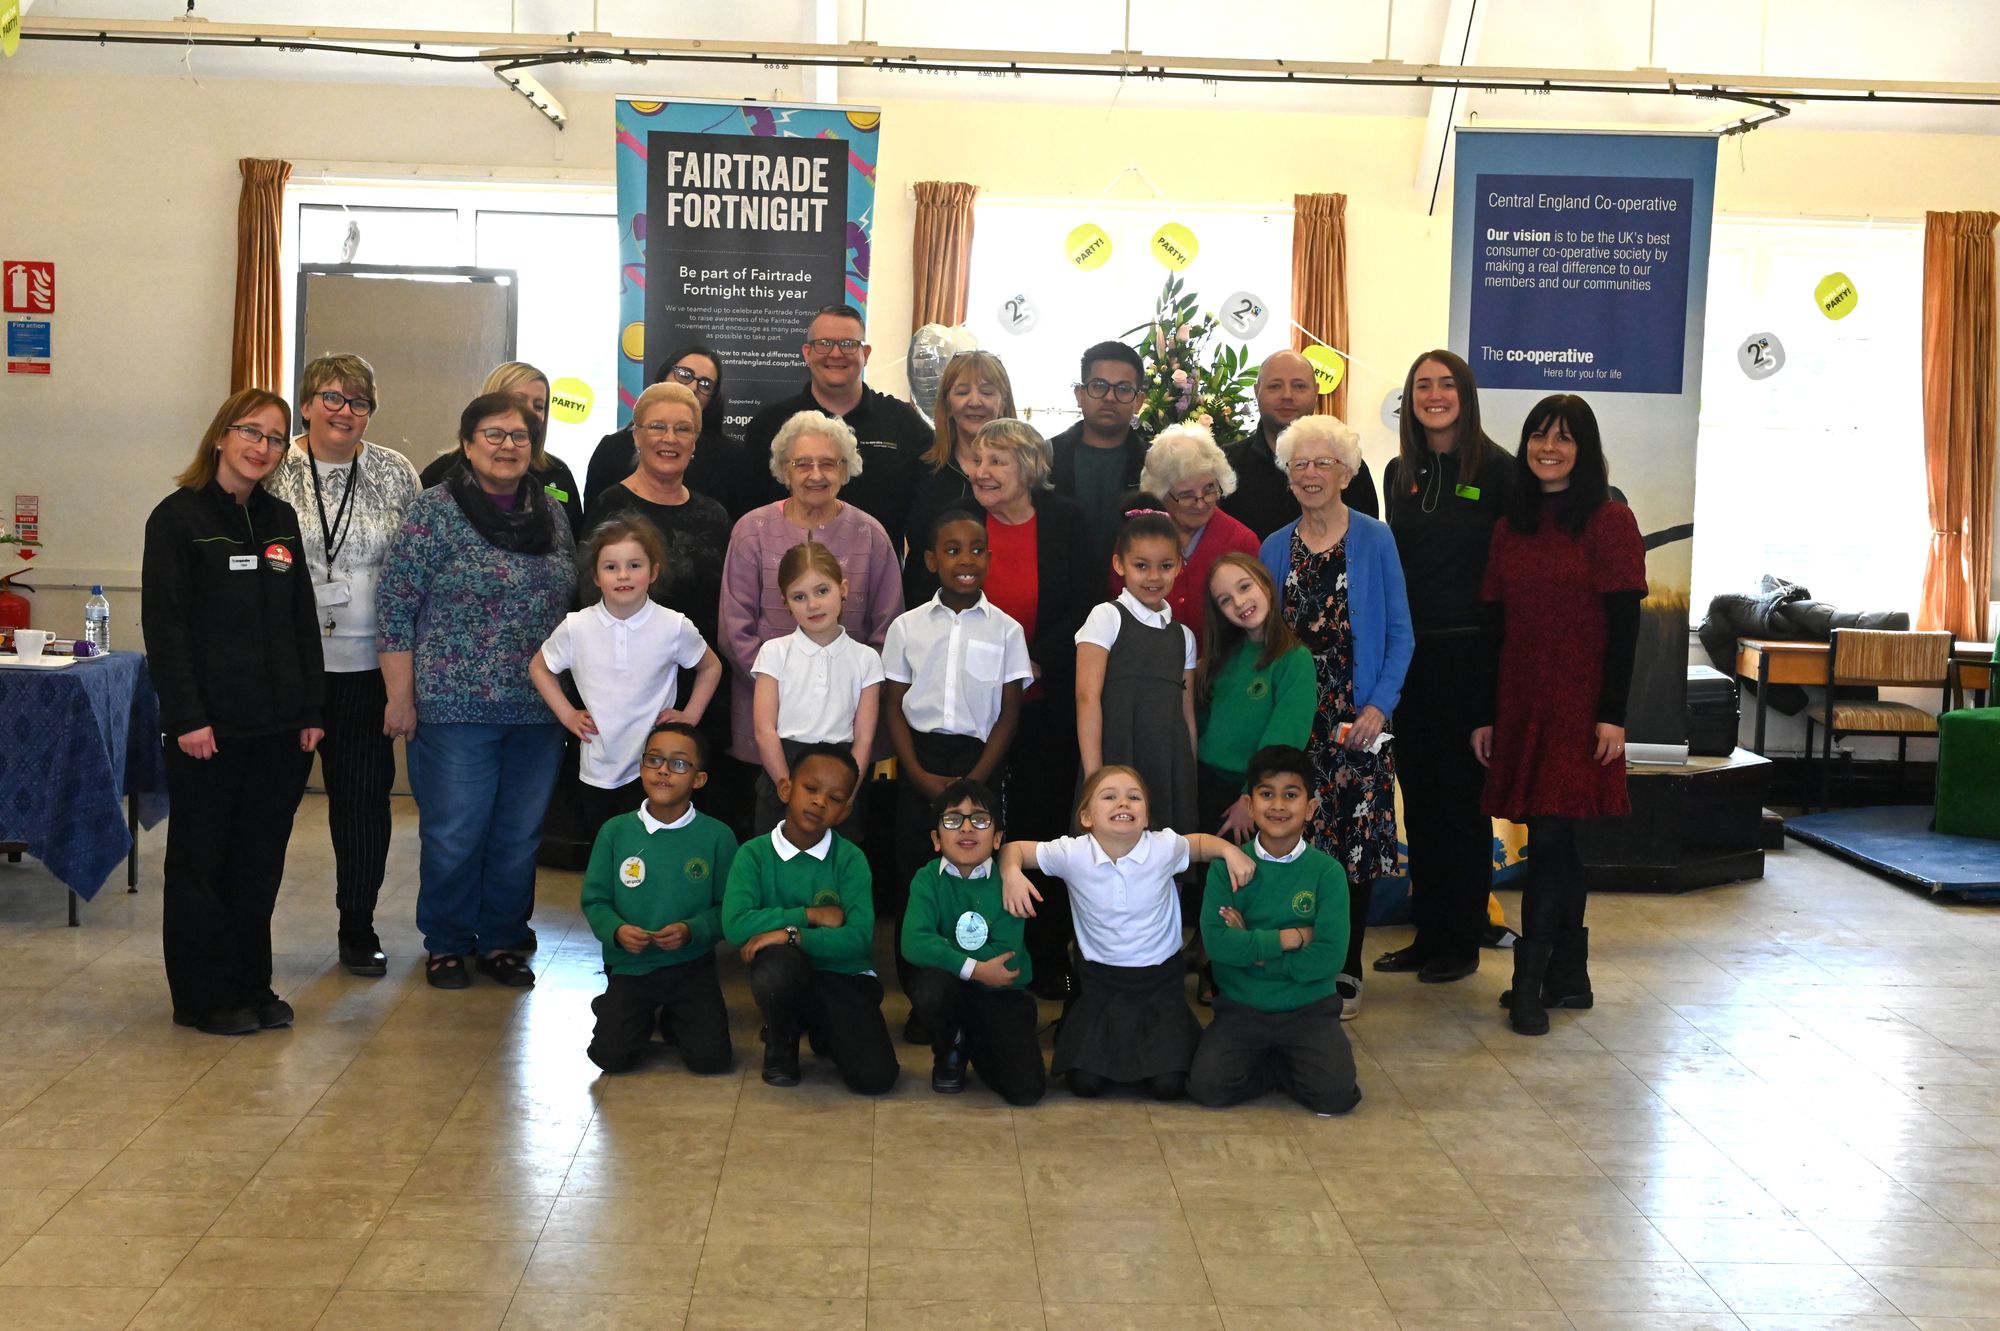 Two generations come together in Birmingham for special event to mark Fairtrade Fortnight